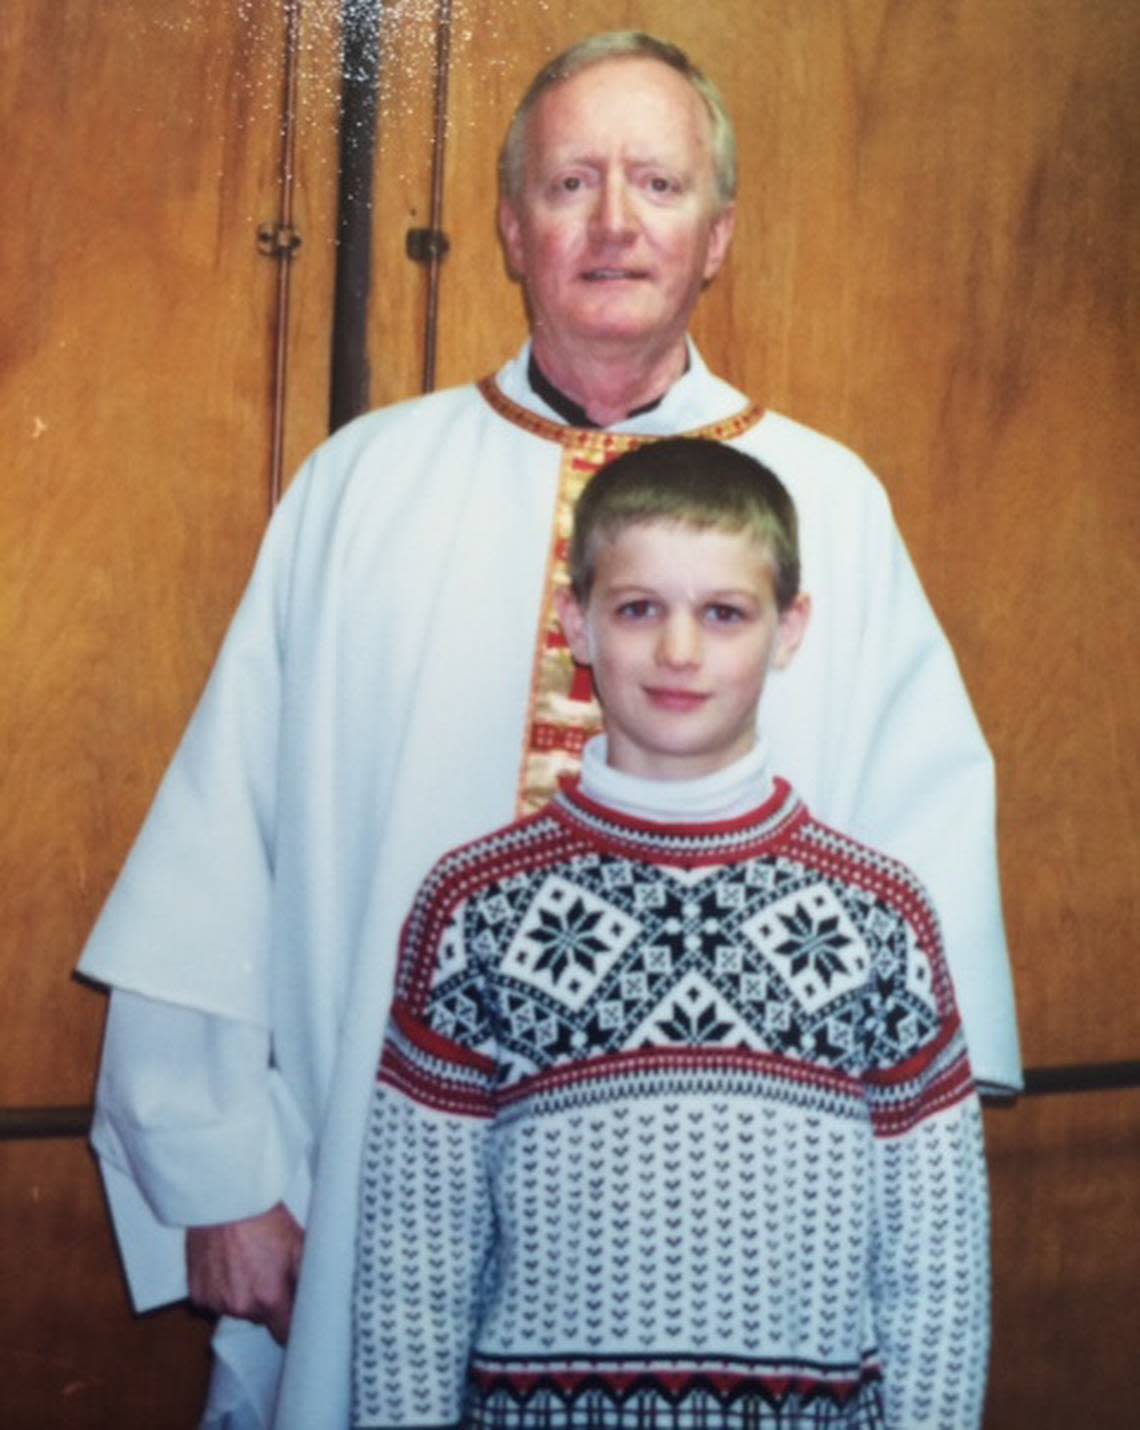 Father Michael Kelly stands with Trevor Martin, then about 10 years old, during the time Kelly sexually abused Trevor when he was an altar boy at St. Andrew Parish in Calaveras County.